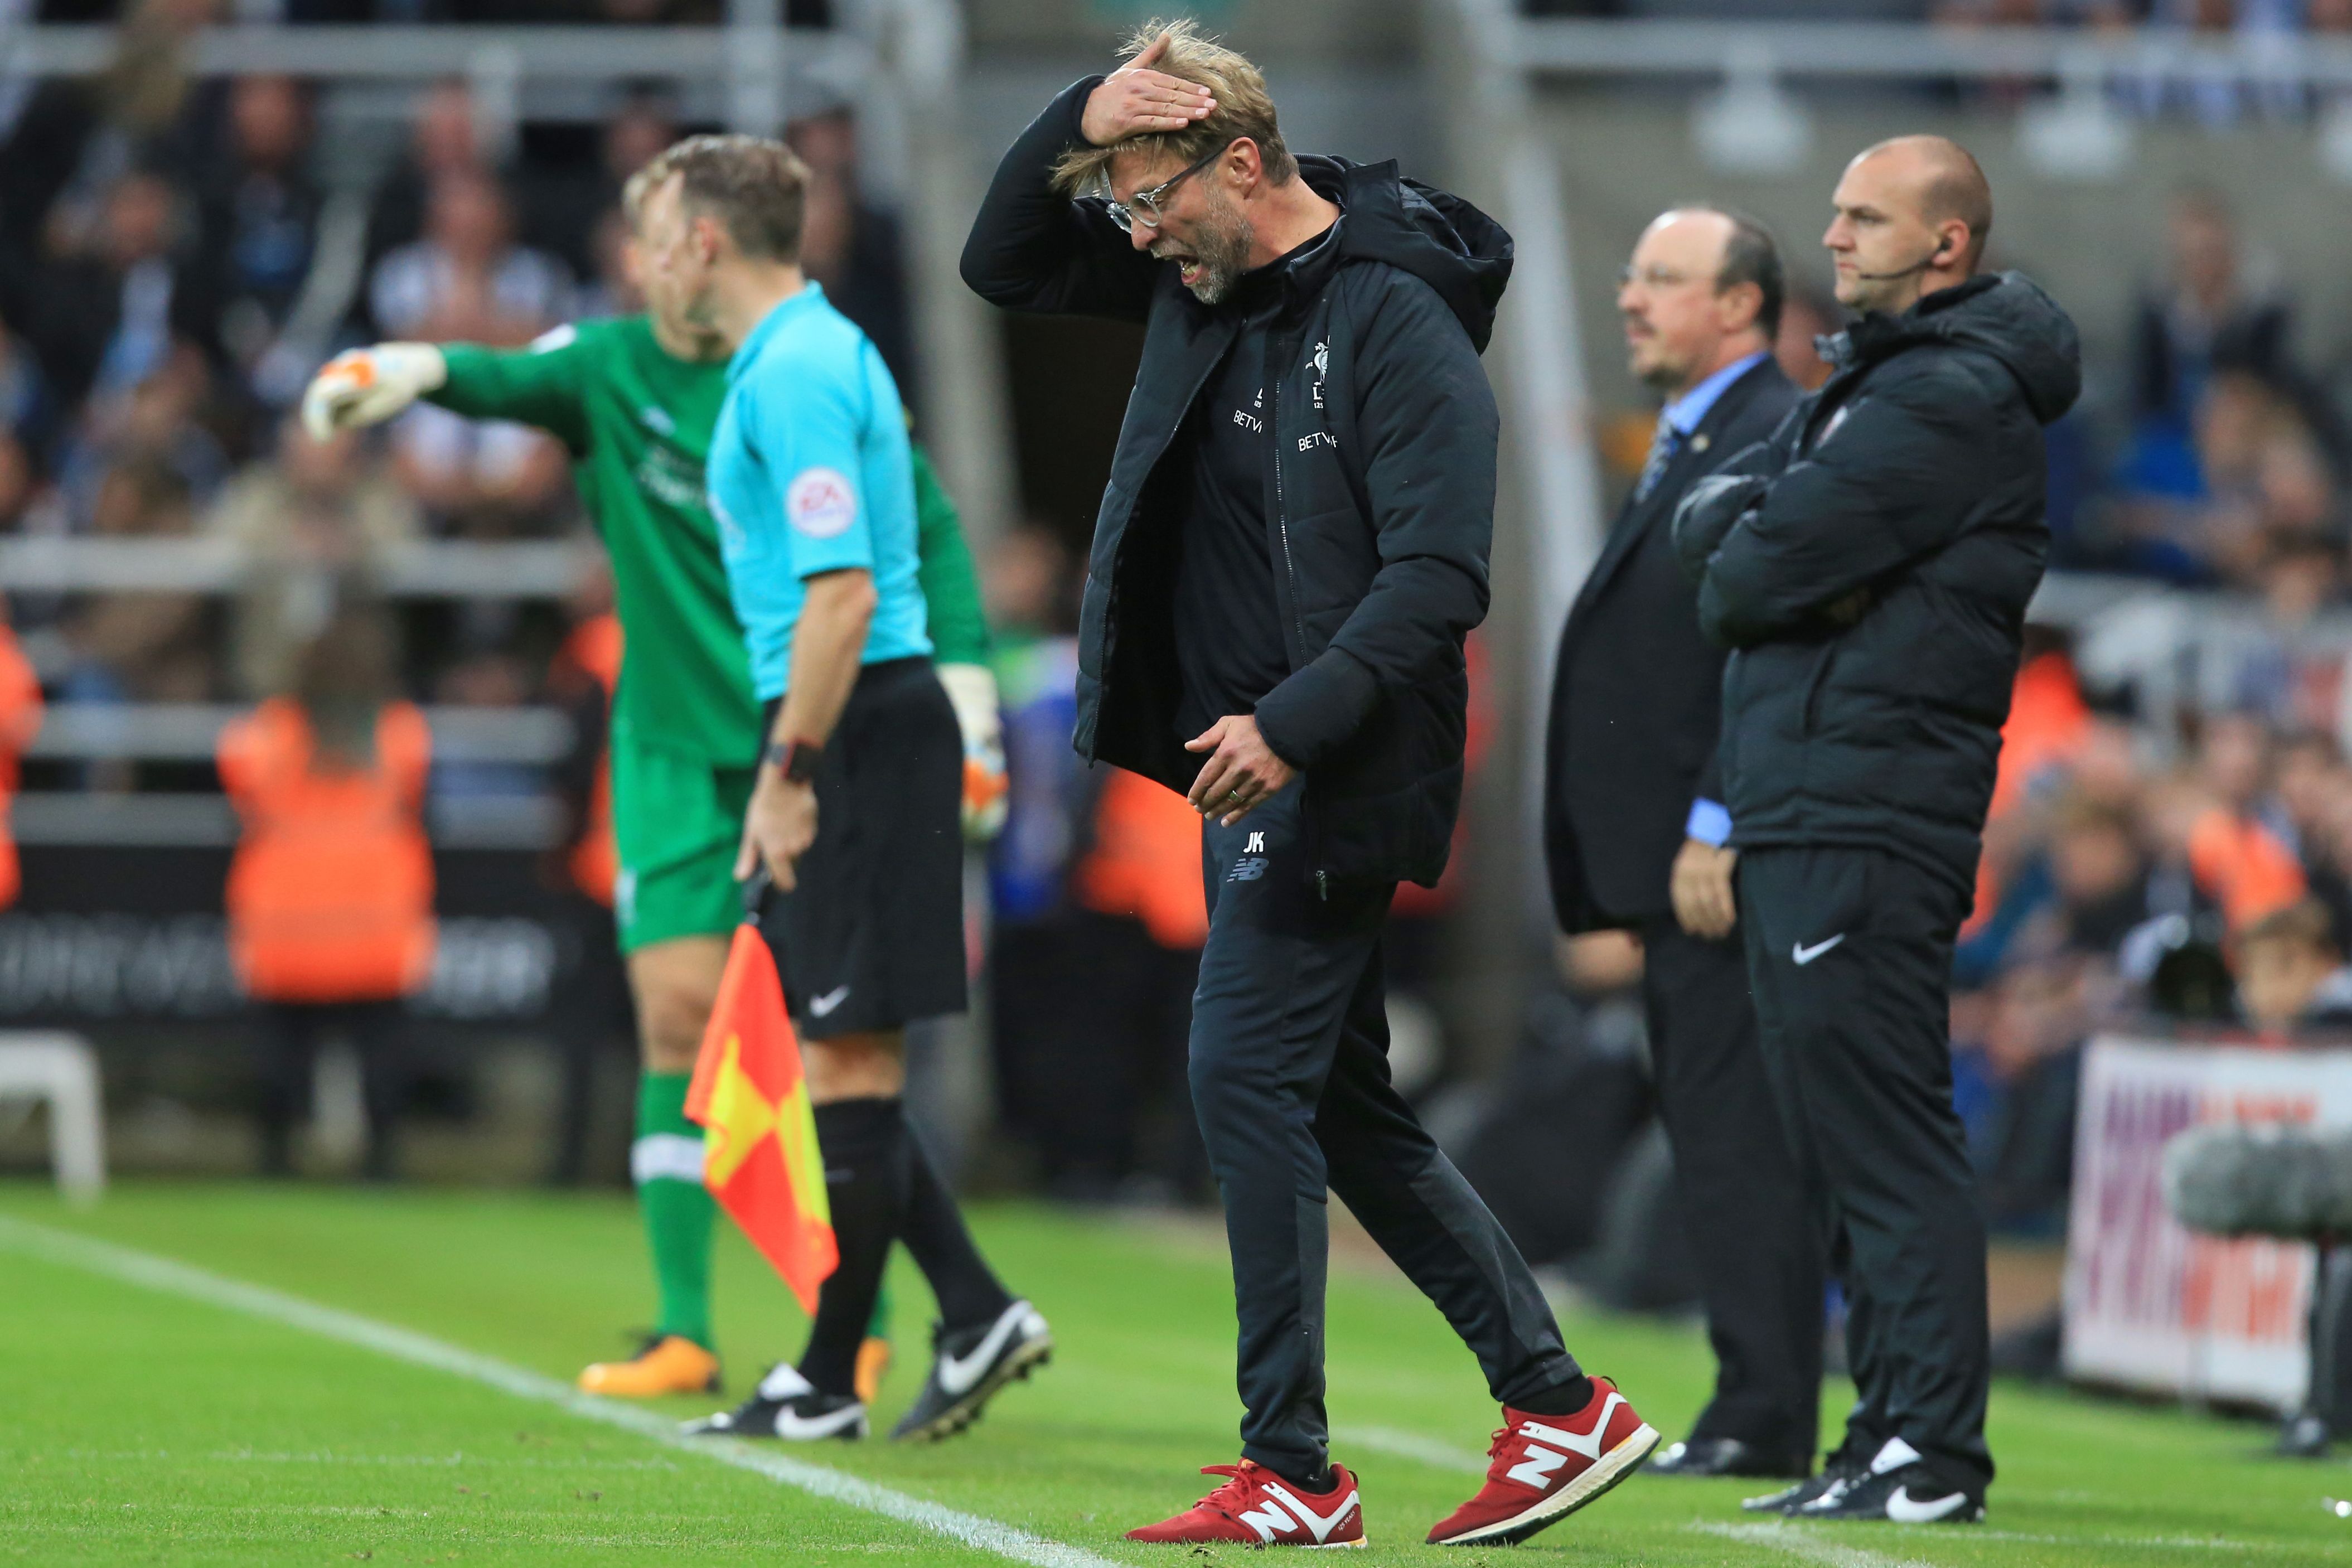 Liverpool's German manager Jurgen Klopp gestures on the touchline during the English Premier League football match between Newcastle United and Liverpool at St James' Park in Newcastle-upon-Tyne, north east England on October 1, 2017.
The game ended 1-1. / AFP PHOTO / Lindsey PARNABY / RESTRICTED TO EDITORIAL USE. No use with unauthorized audio, video, data, fixture lists, club/league logos or 'live' services. Online in-match use limited to 75 images, no video emulation. No use in betting, games or single club/league/player publications.  /         (Photo credit should read LINDSEY PARNABY/AFP/Getty Images)